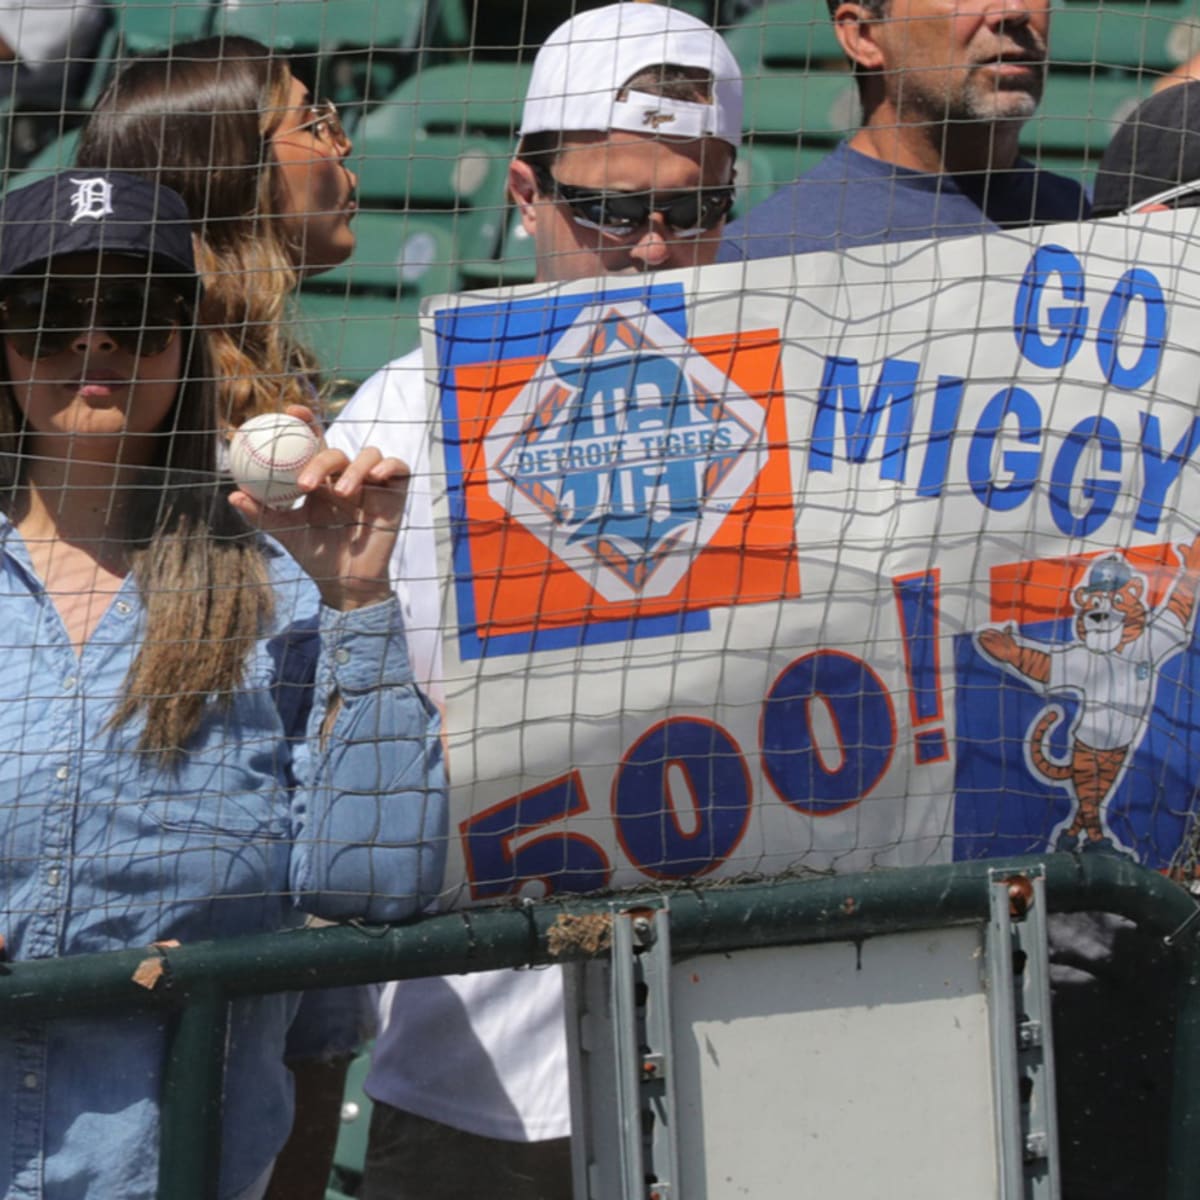 Detroit Tigers Video Fans Fight Video at Comerica Park